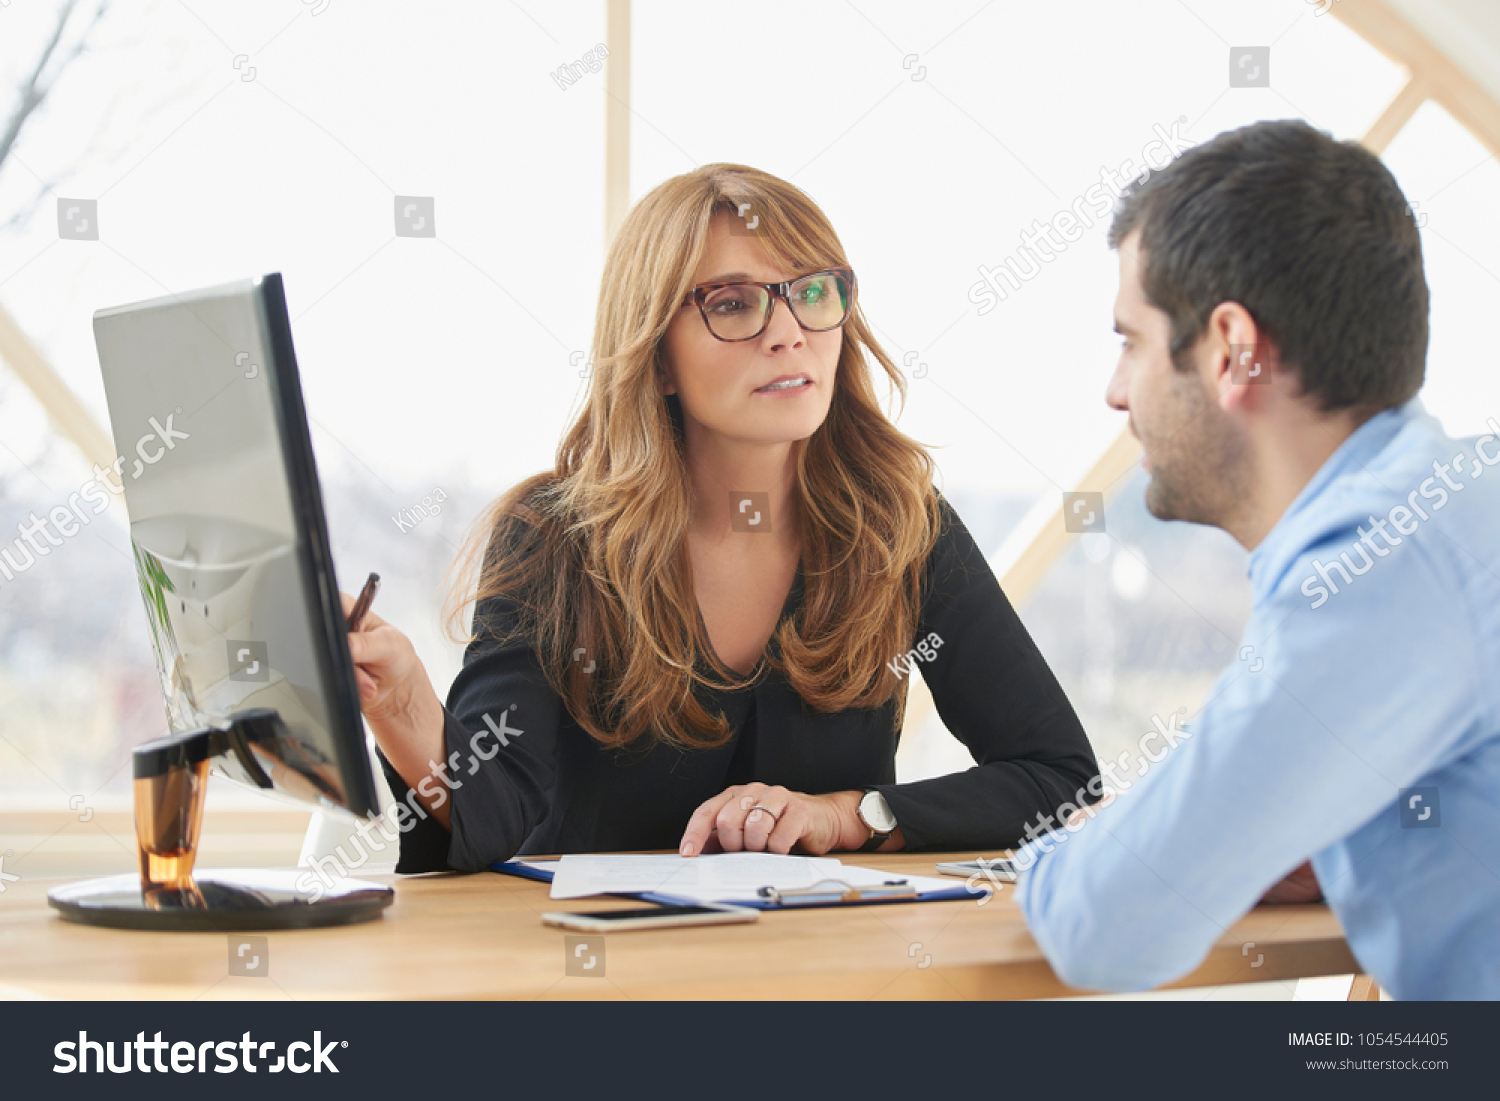 Executive middle aged businesswoman sitting at desk in front of laptop and doing some paperwork while giving sales advice to her young assistant. Brainstorming at the office. #1054544405